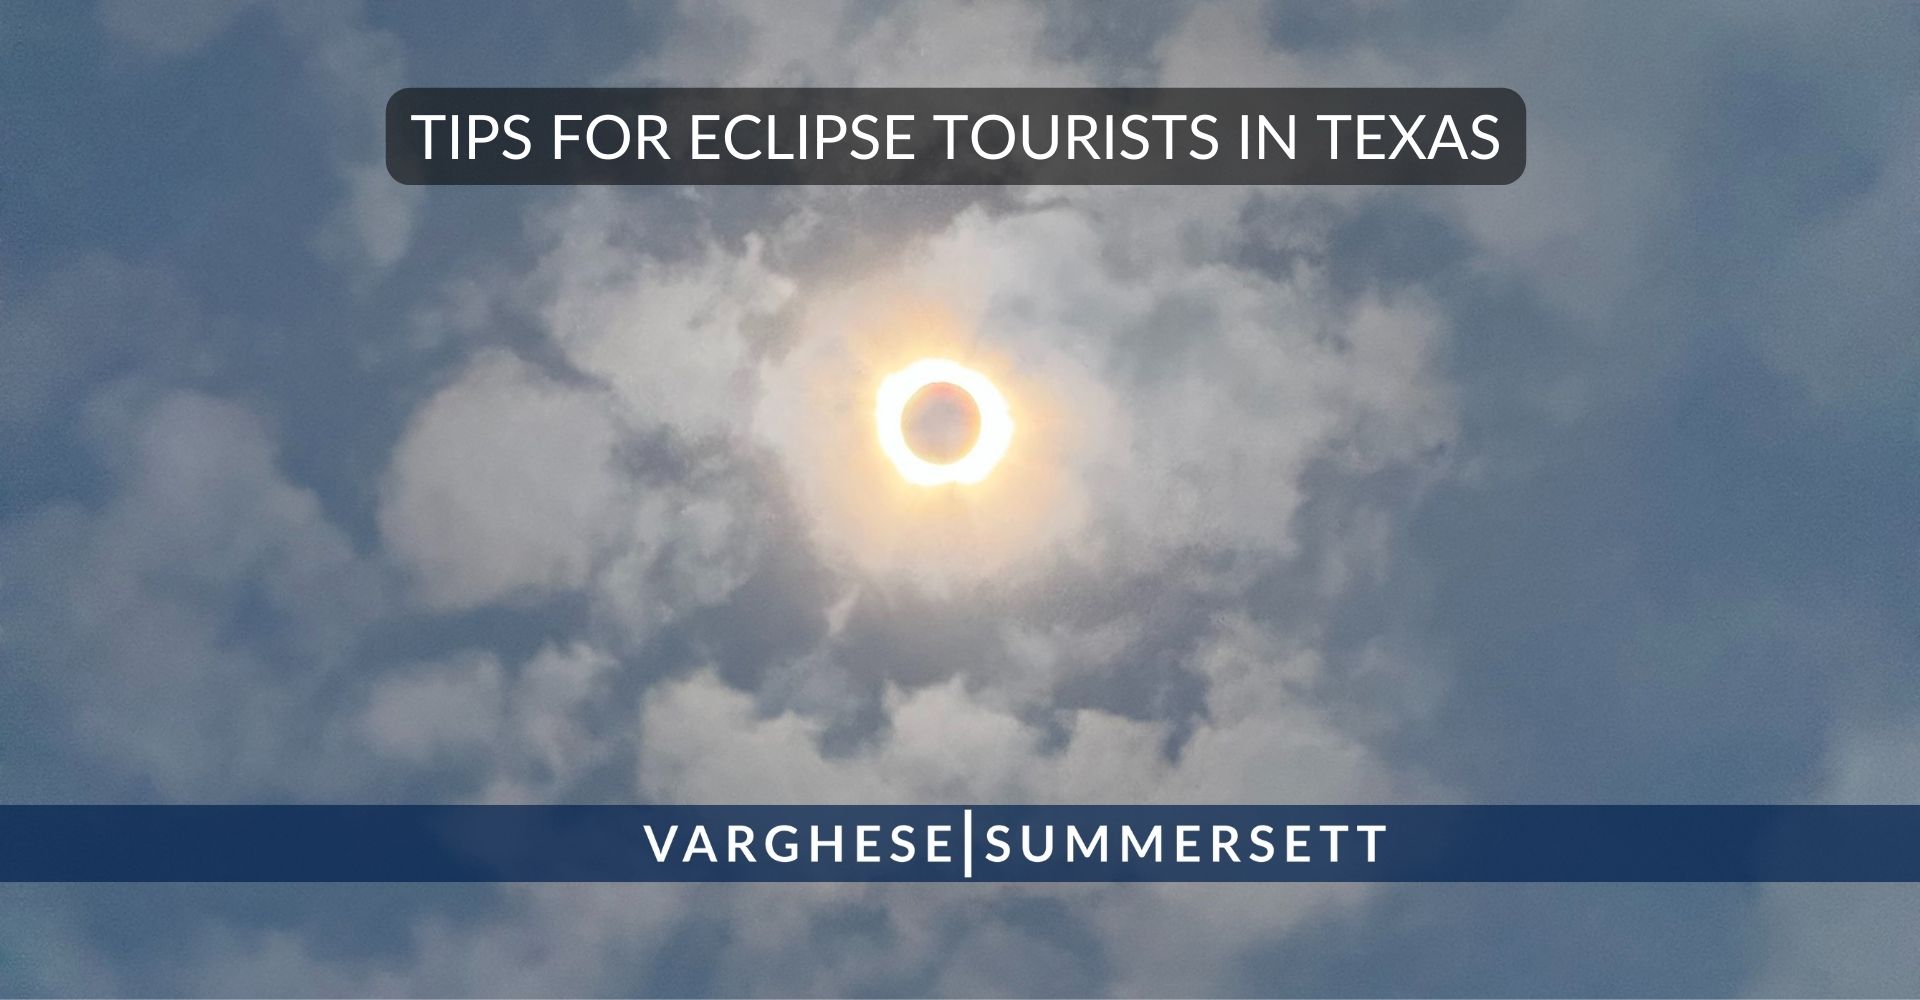 Eclipse Tourists: Texas Laws You Need to Know